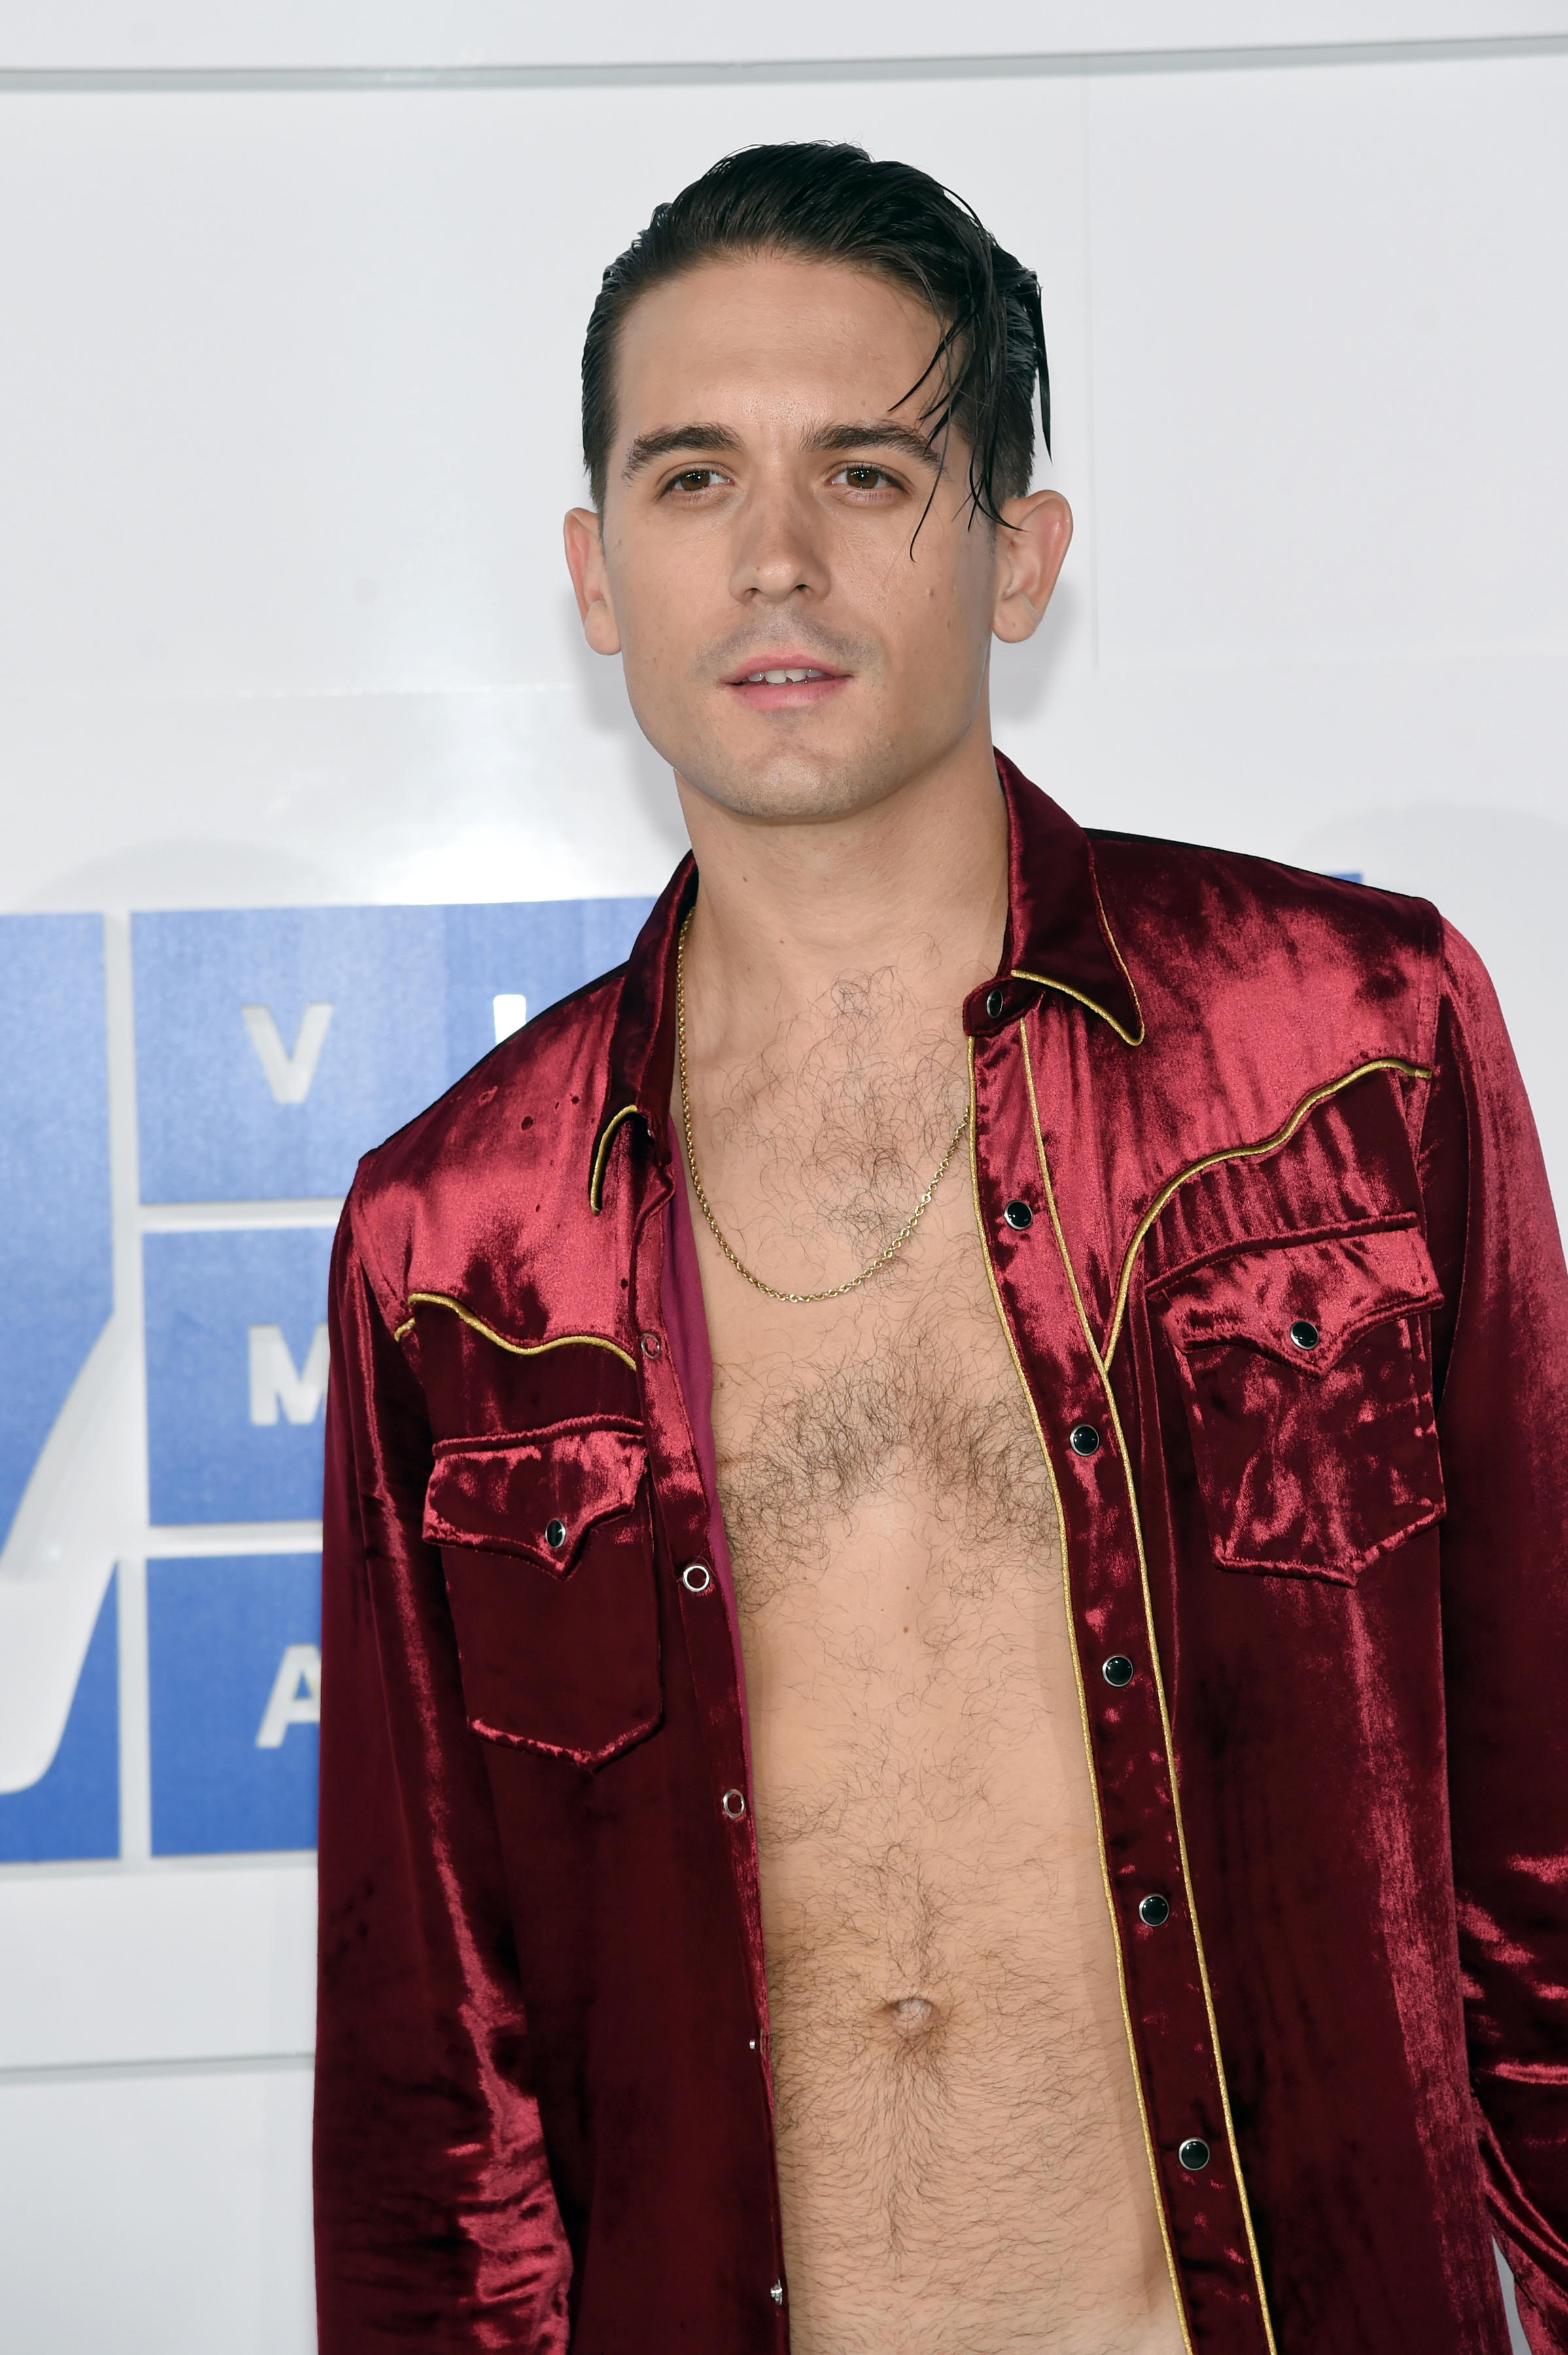 G-Eazy talks about collaboration with Britney Spears - CBS News